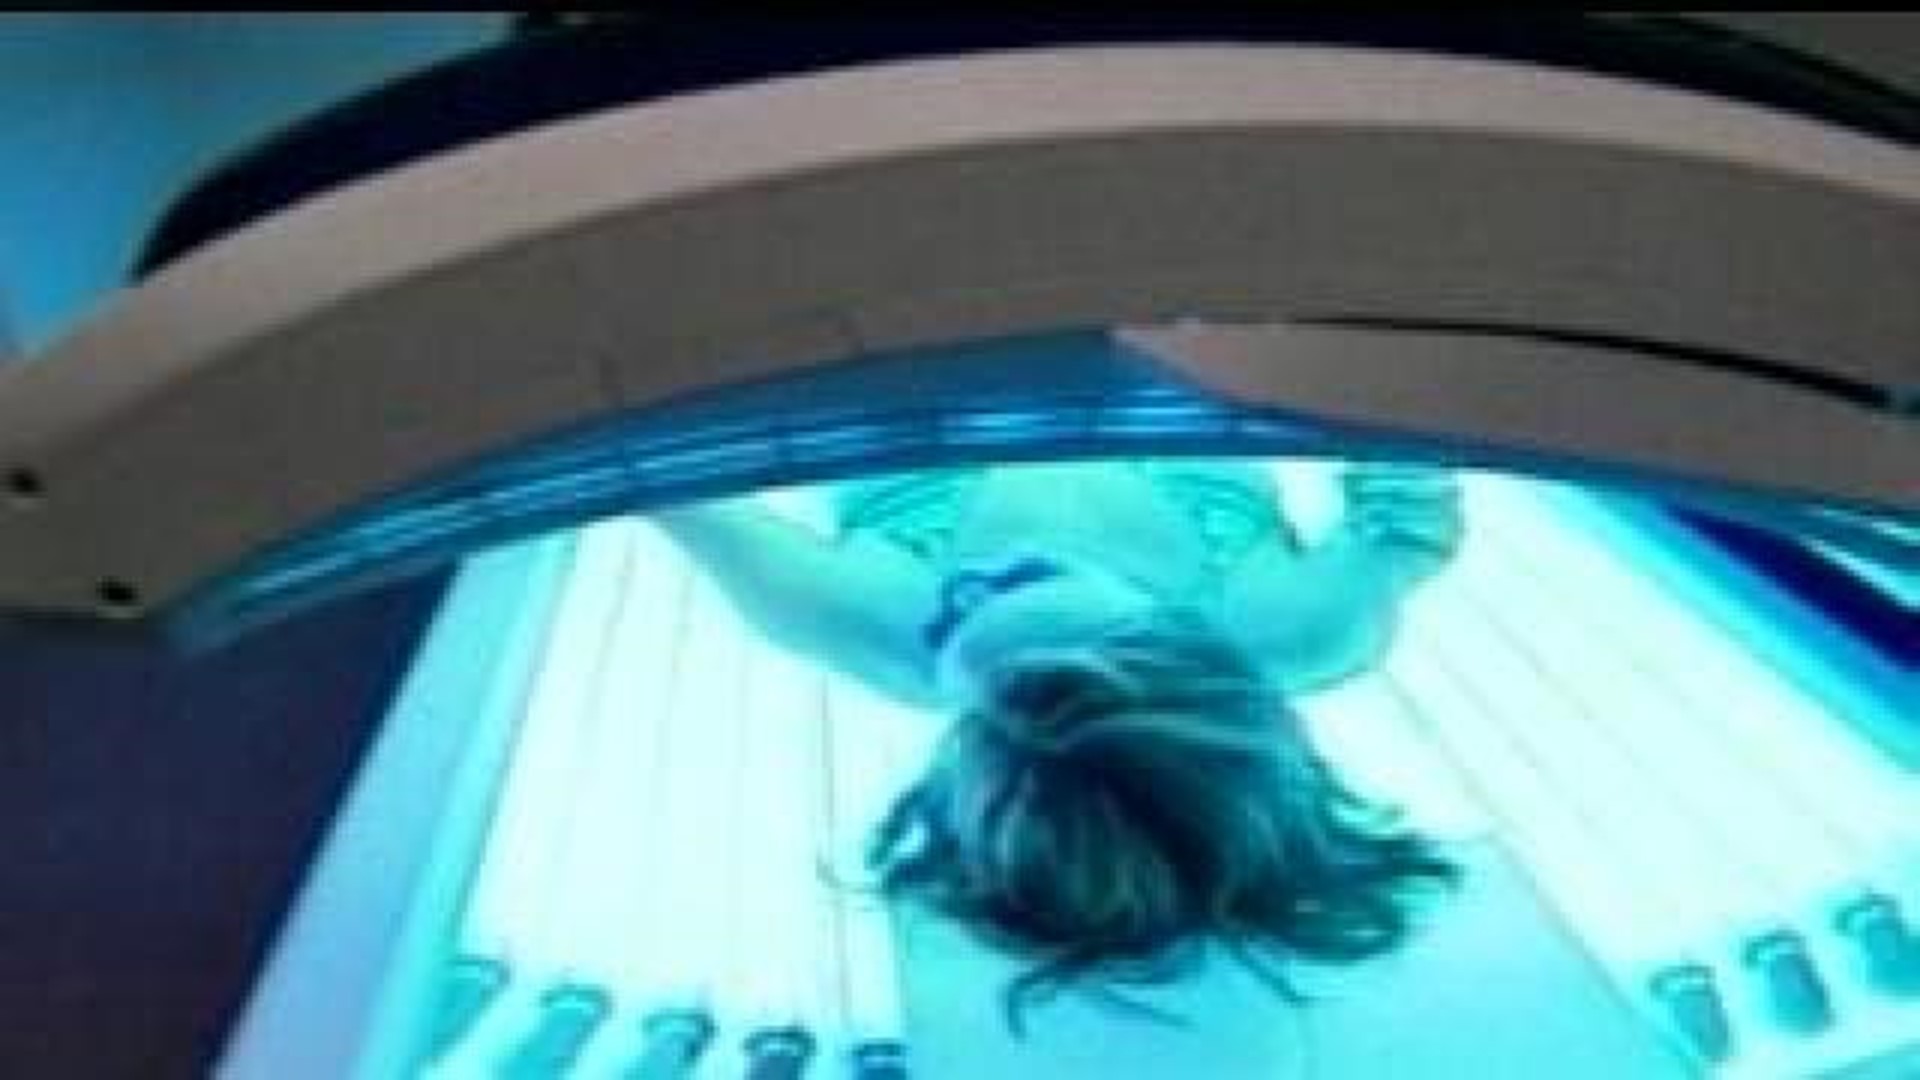 Local businesses react to teen tan ban in Illinois